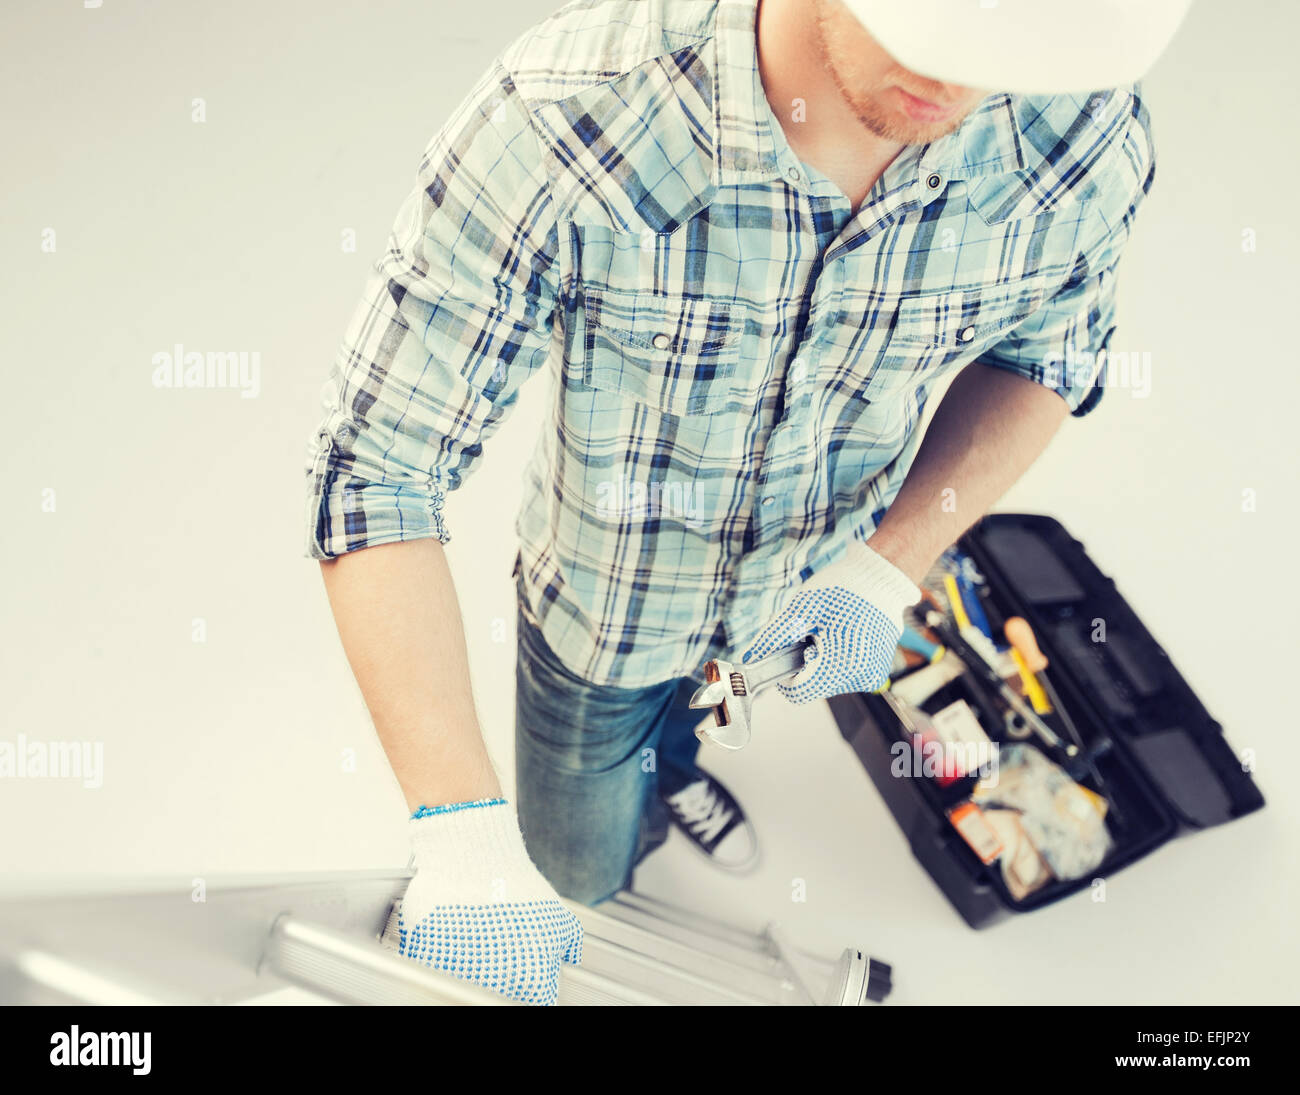 man with ladder, toolkit and spanner Stock Photo